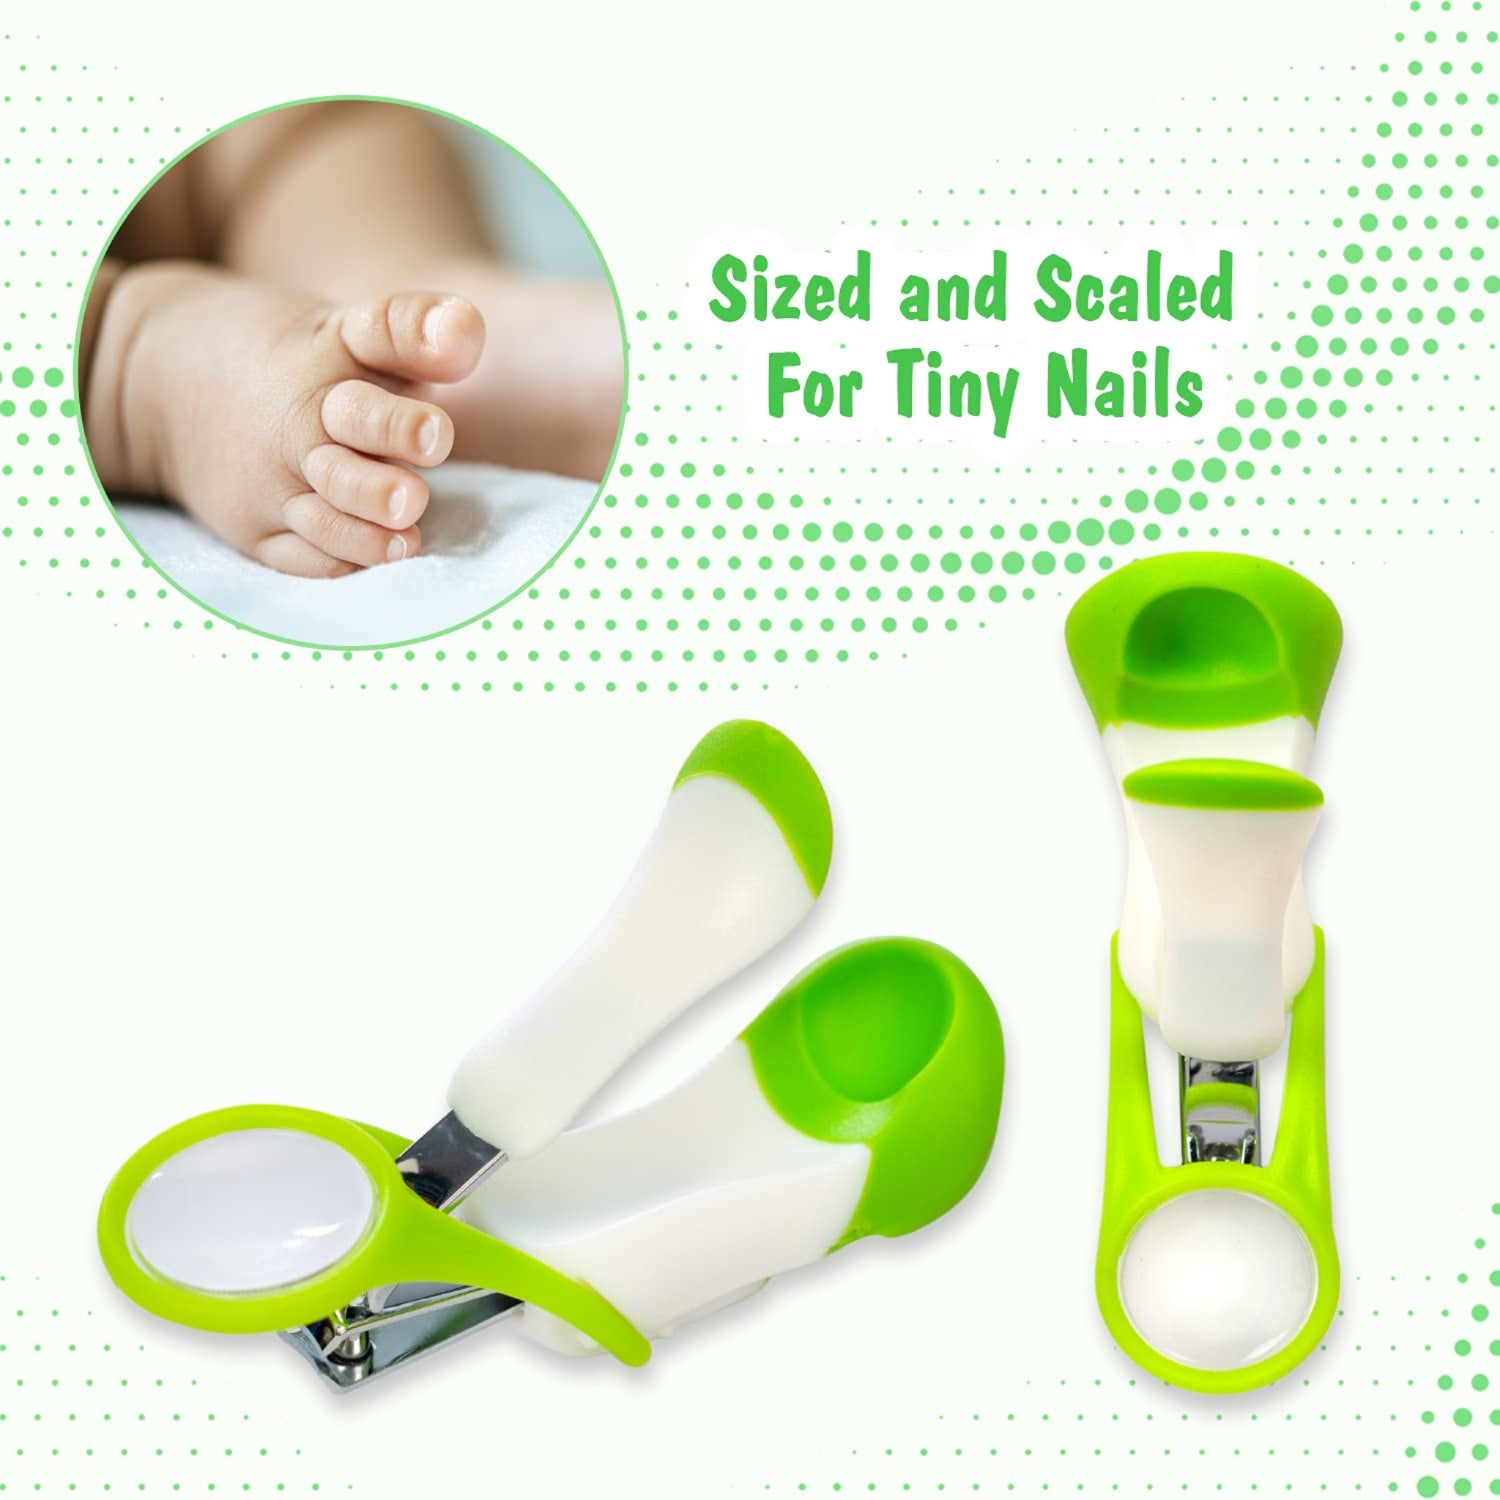 Minikin Baby Nail Clipper with Magnifier Zoom Lens I Safety Nail Cutter for New Born Babies Infant Toddler I NB - 10 Years